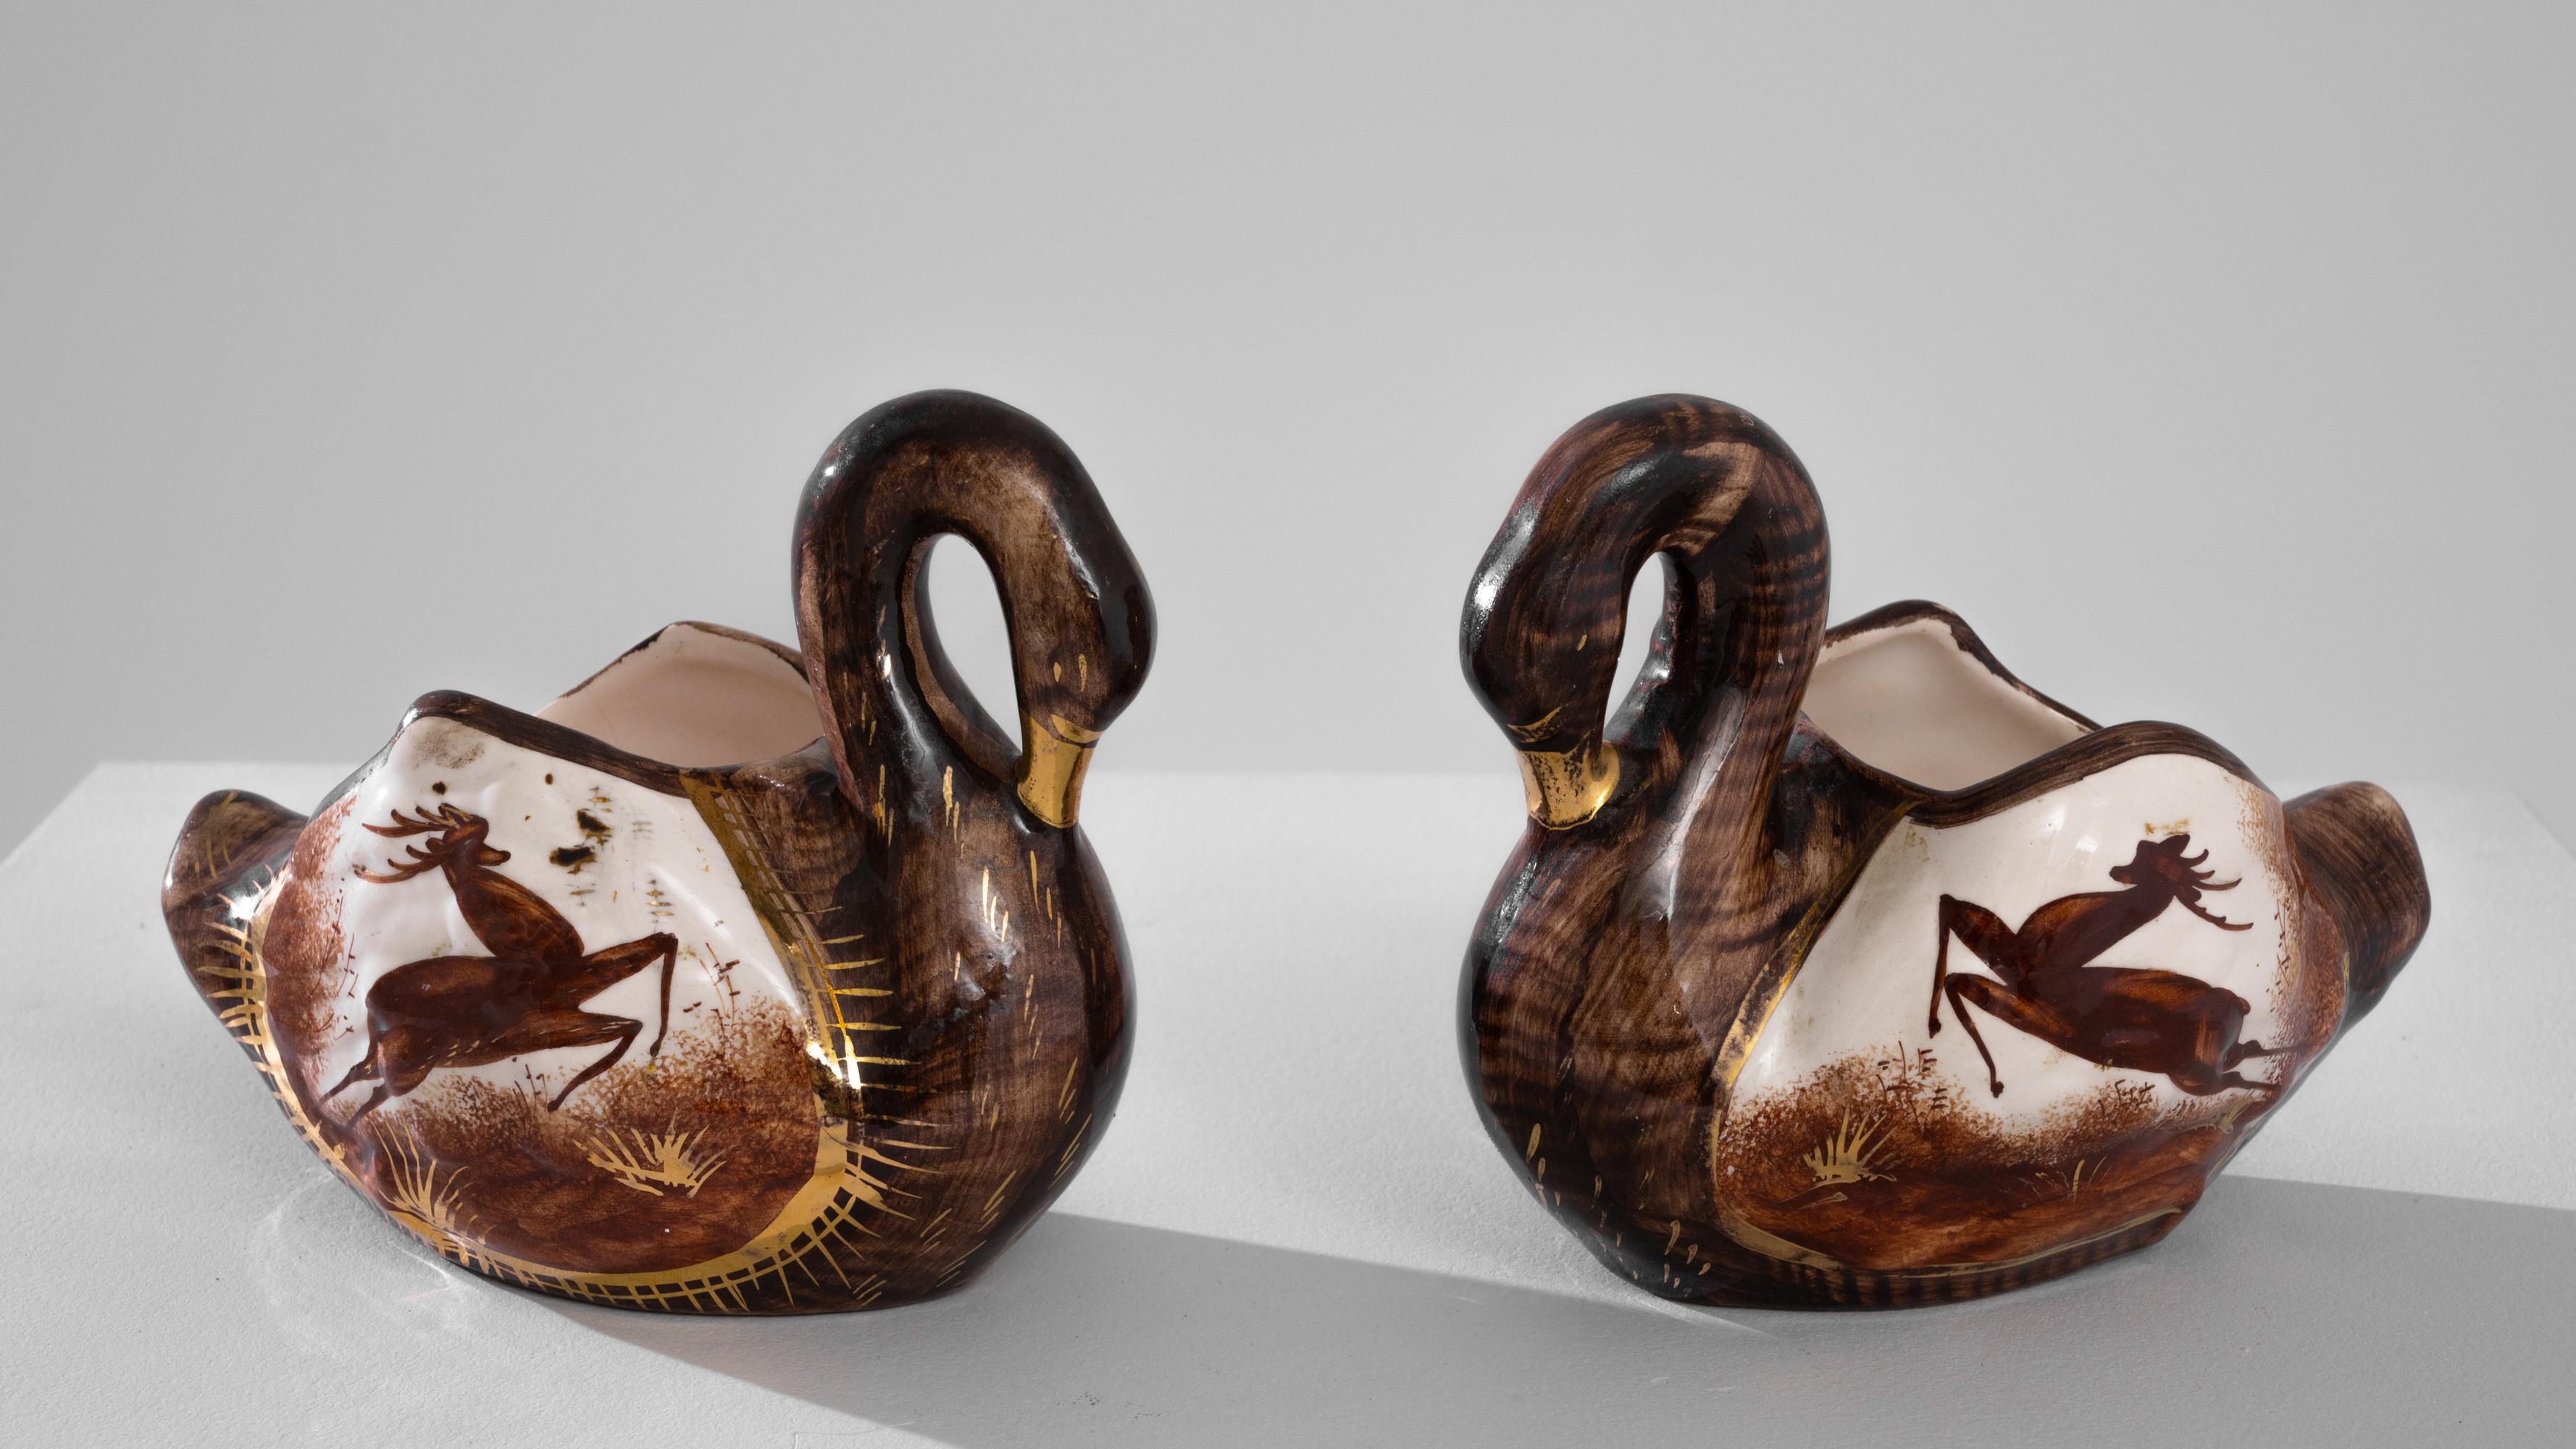 Introducing this exquisite 20th Century European Ceramic Swan – a versatile piece that effortlessly transitions between being a charming planter and an alluring decorative accent. The swan's elegant form is enhanced by rich brown hues and intricate